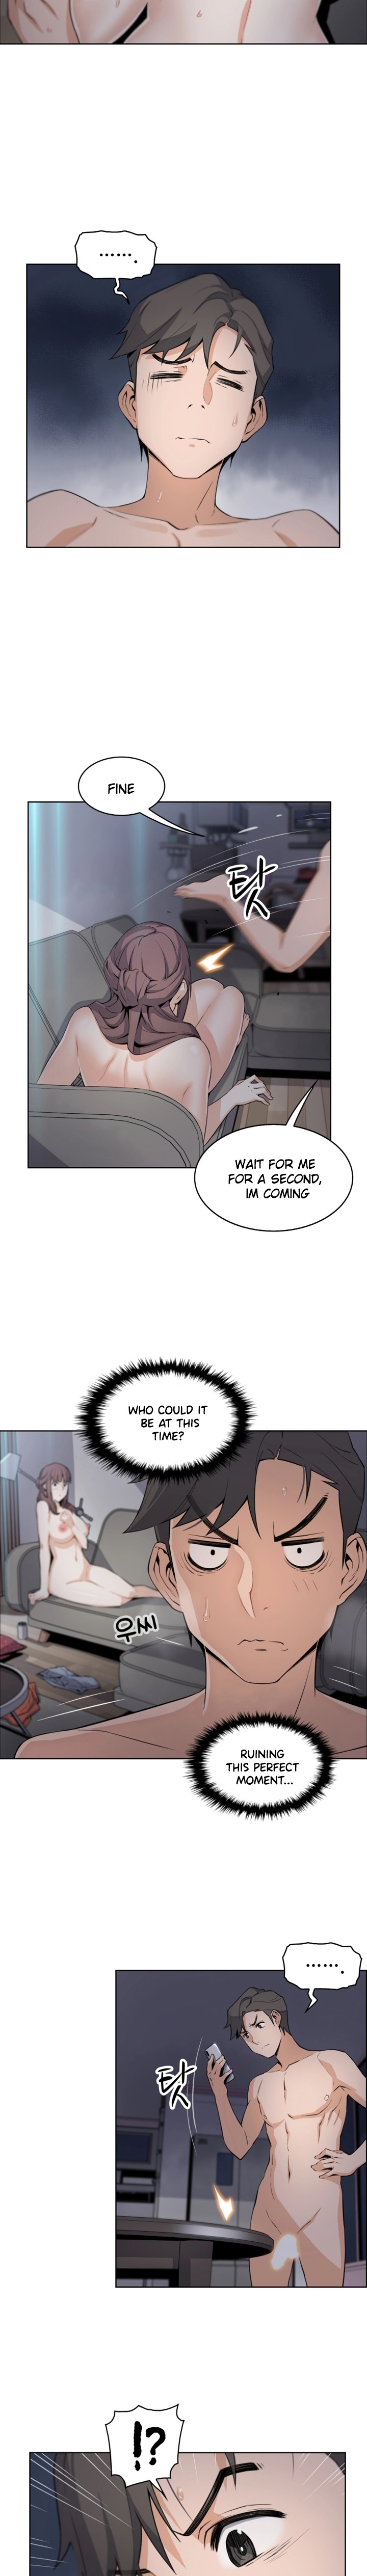 Housekeeper Manhwa - Chapter 12 Page 4